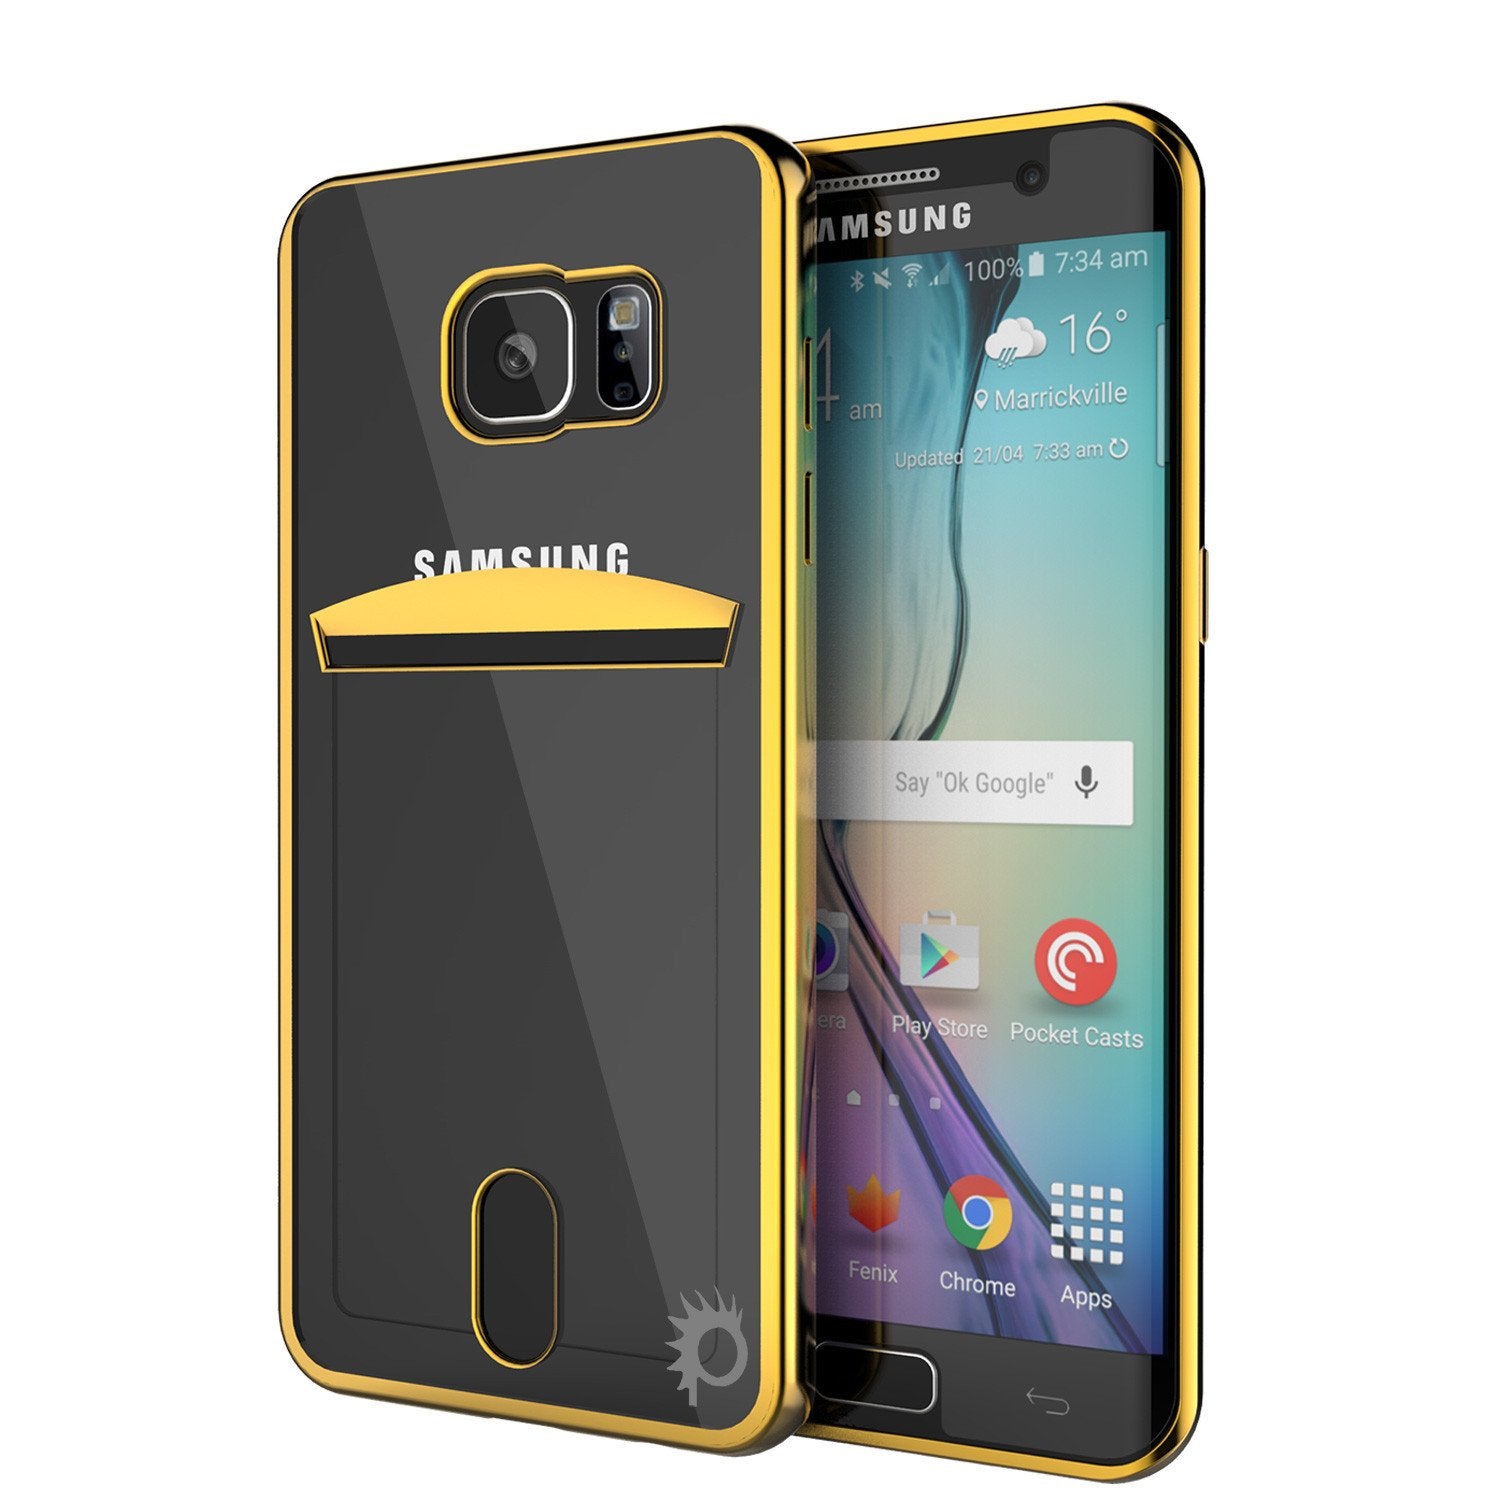 Galaxy S6 EDGE Case, PUNKCASE® LUCID Gold Series | Card Slot | SHIELD Screen Protector | Ultra fit